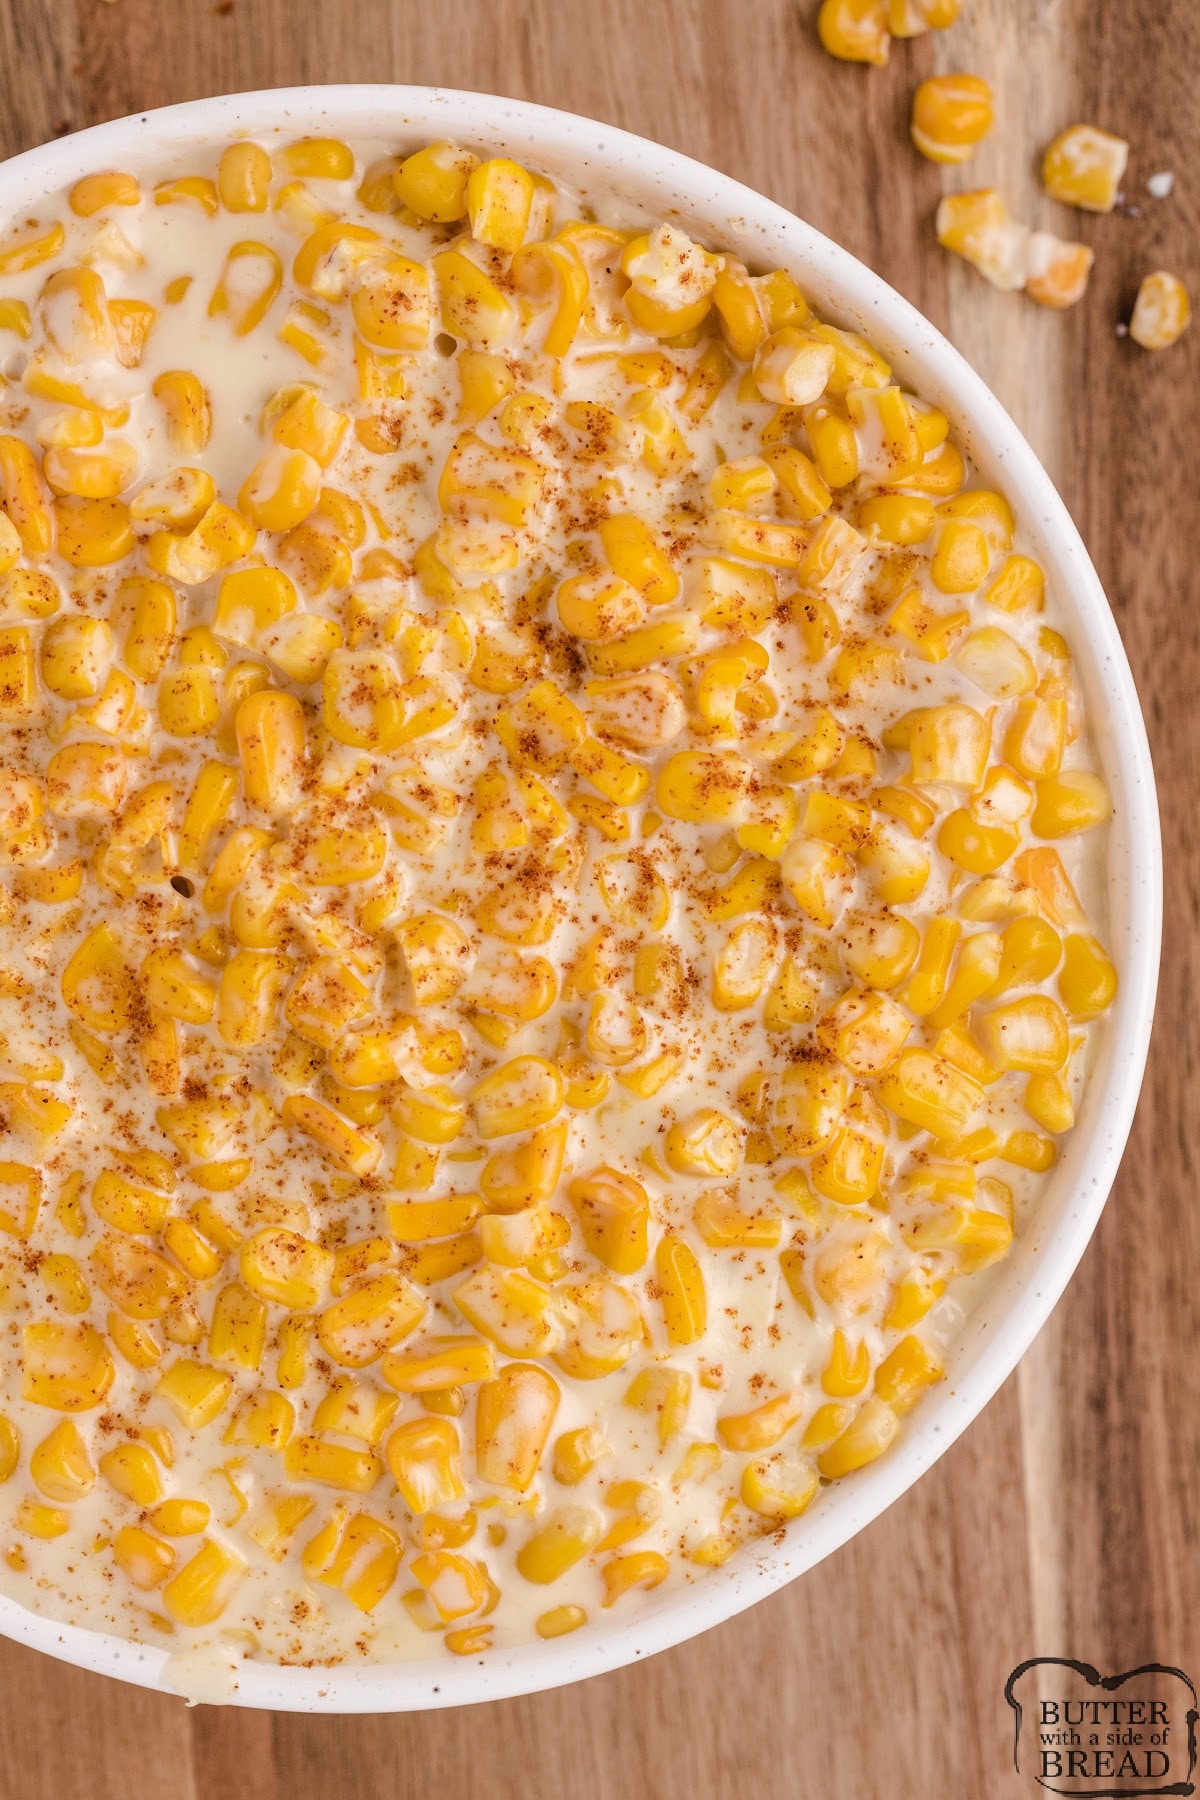 Creamed corn recipe made with whipping cream